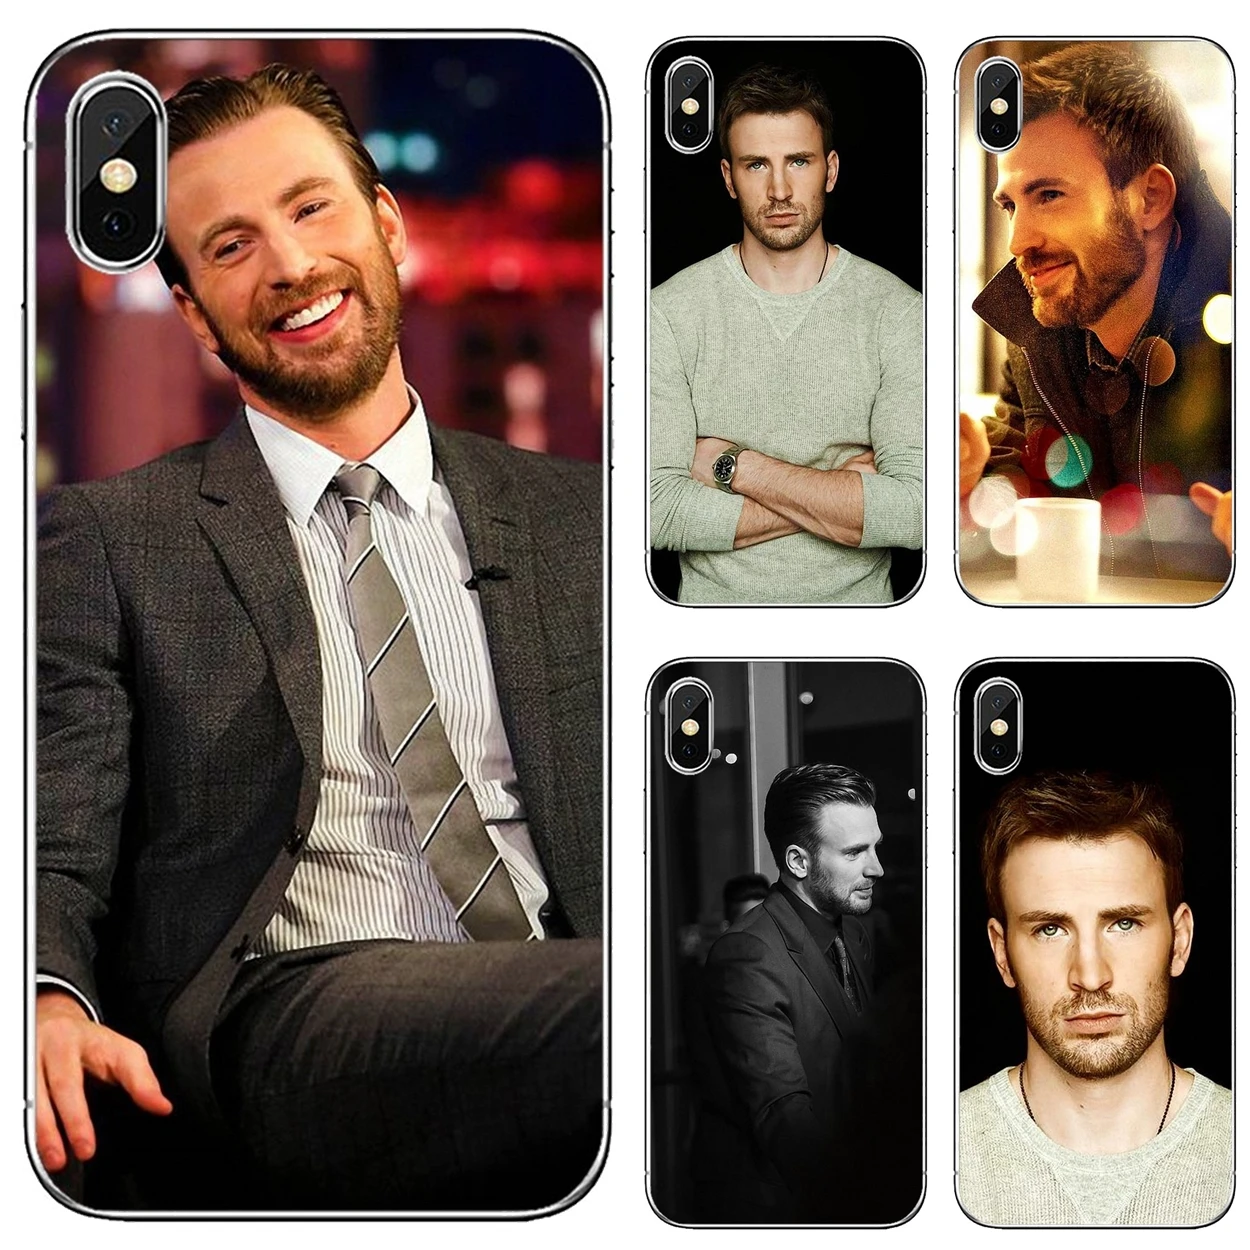 

Housing For iPod Touch iPhone 10 11 12 Pro 4S 5S SE 5C 6 6S 7 8 X XR XS Plus Max 2020 Sexy-USA-Man-Chris-Evans-Captain-America